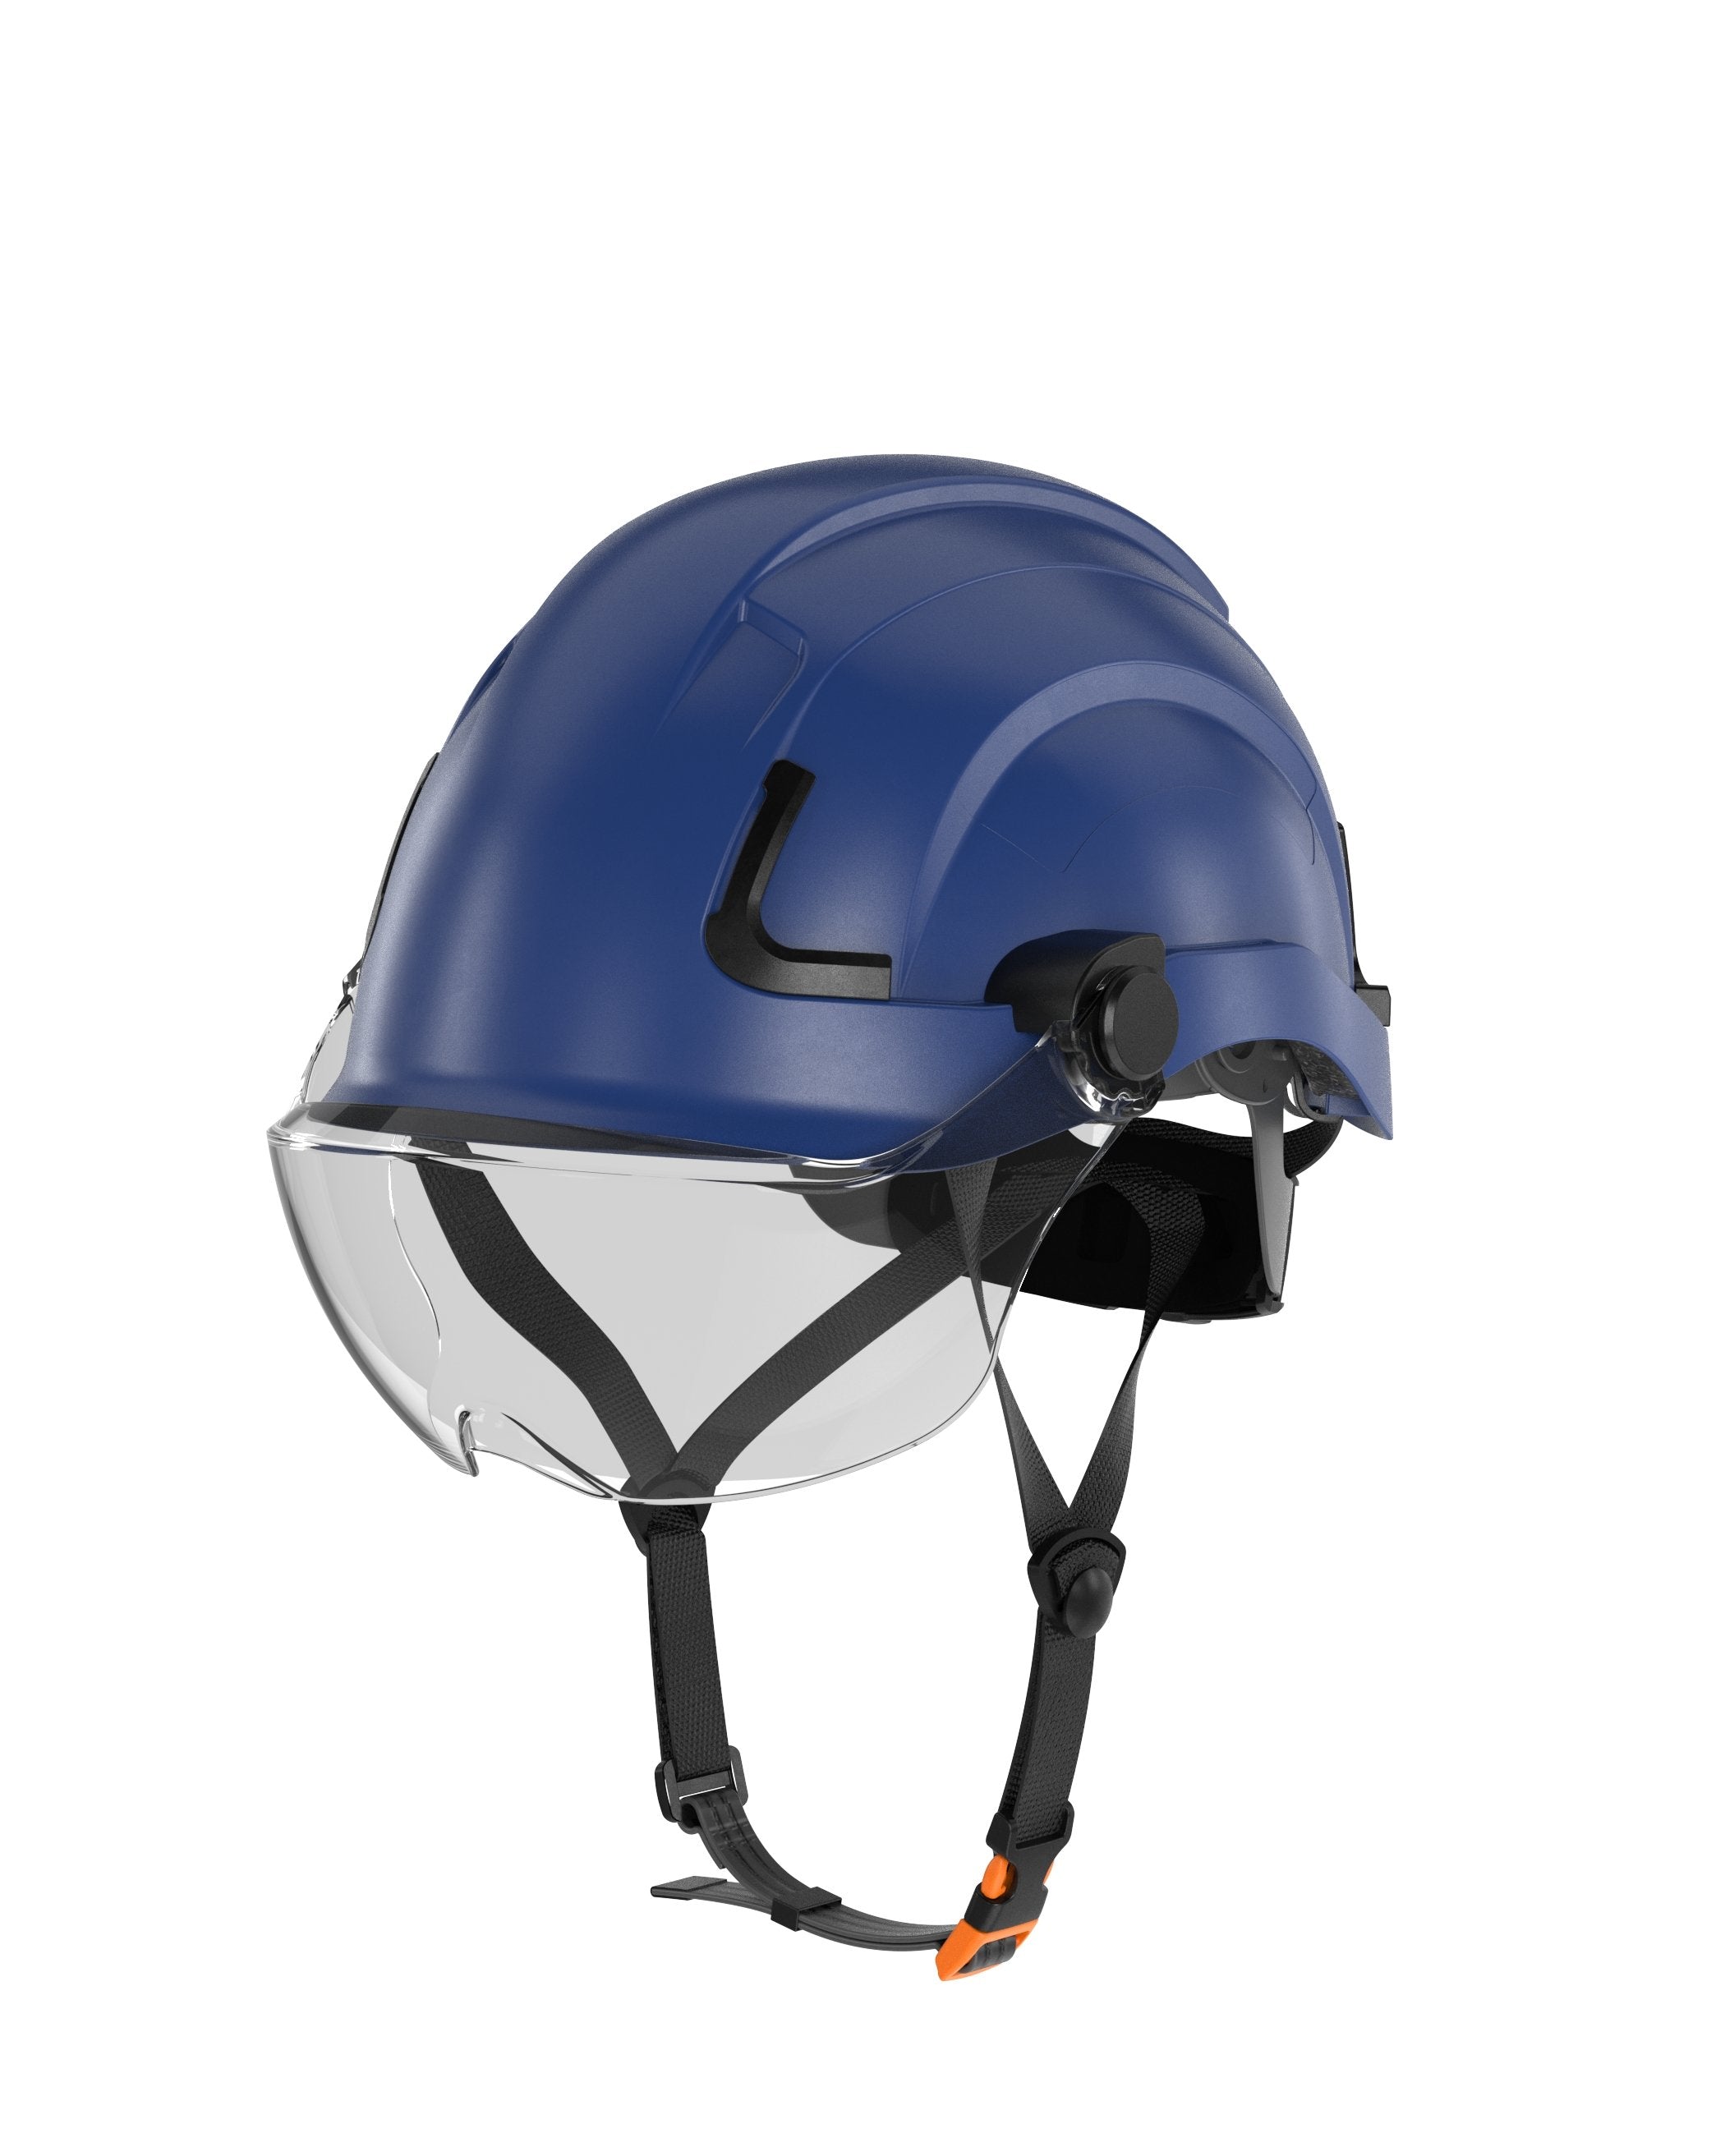 H2-EHV Safety Helmet w/ CLEAR Visor Type 2 Class E, ANSI Z89 and EN12492 rated - Defender Safety